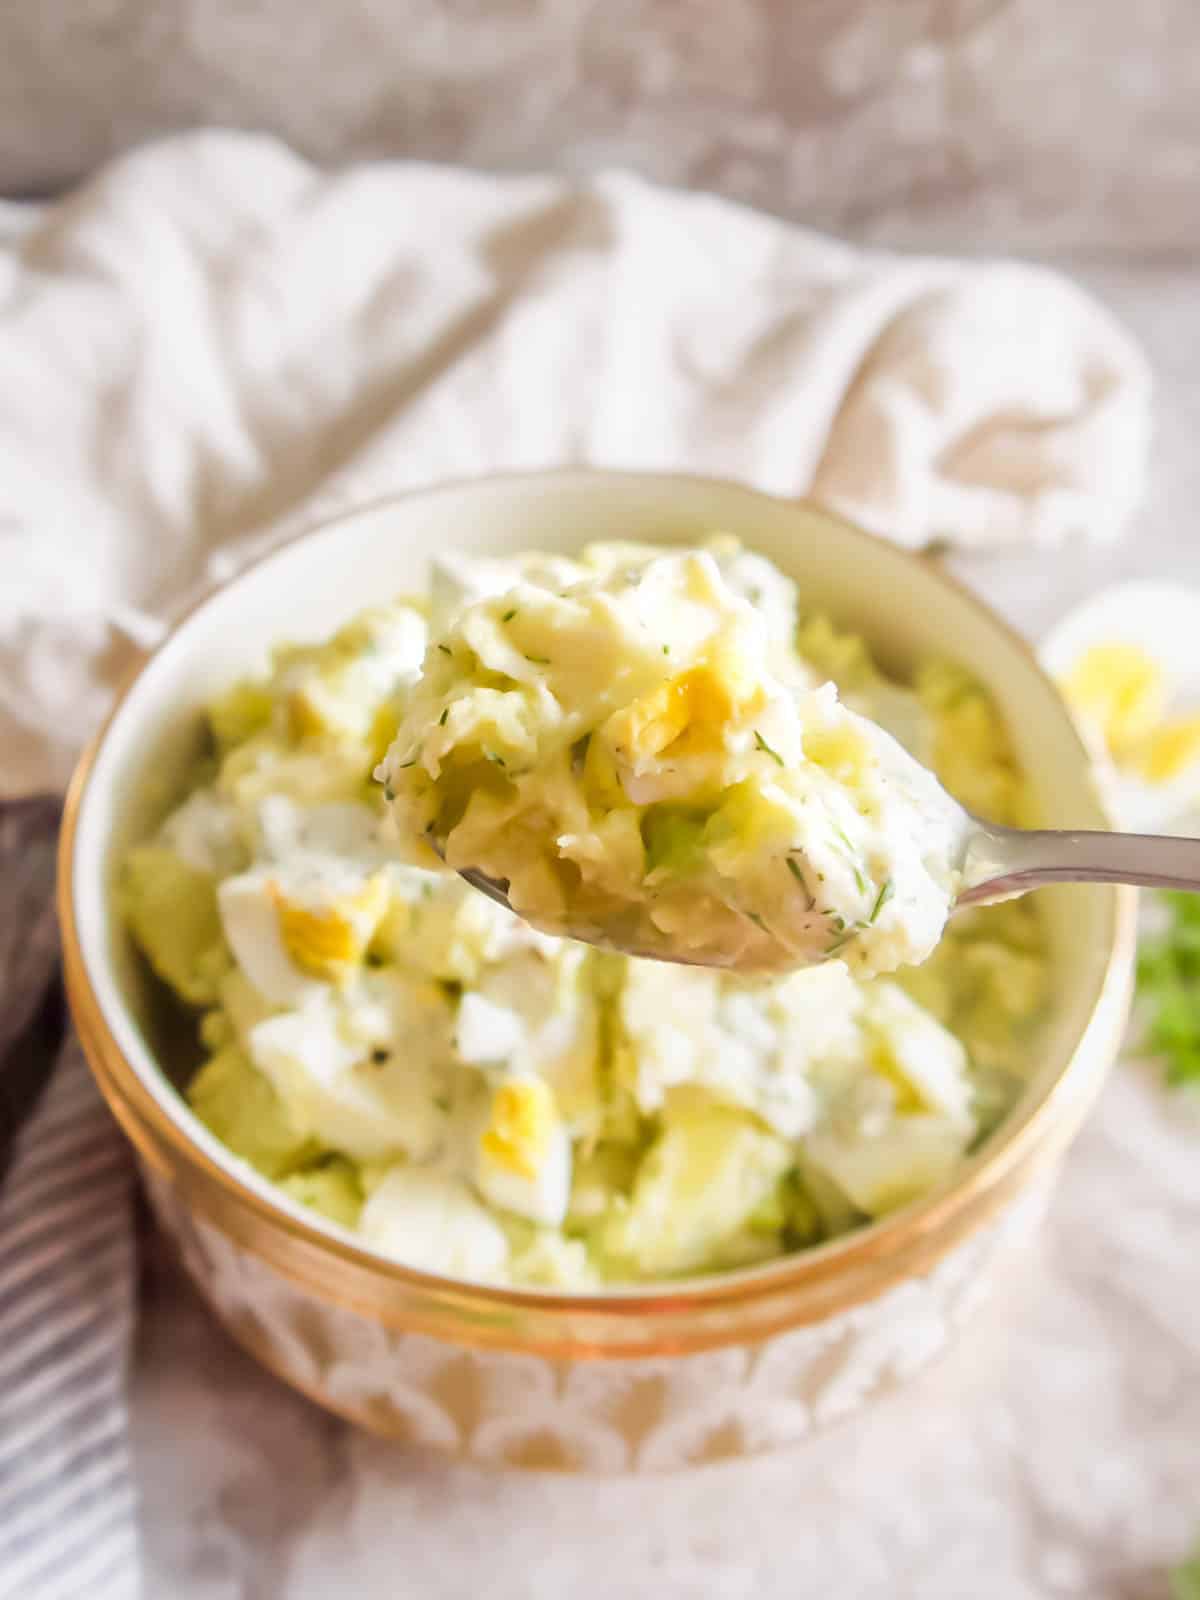 Dill Ranch Potato Salad with Avocado and Eggs (Paleo, Whole30) | Perchance to Cook, www.perchancetocook.com